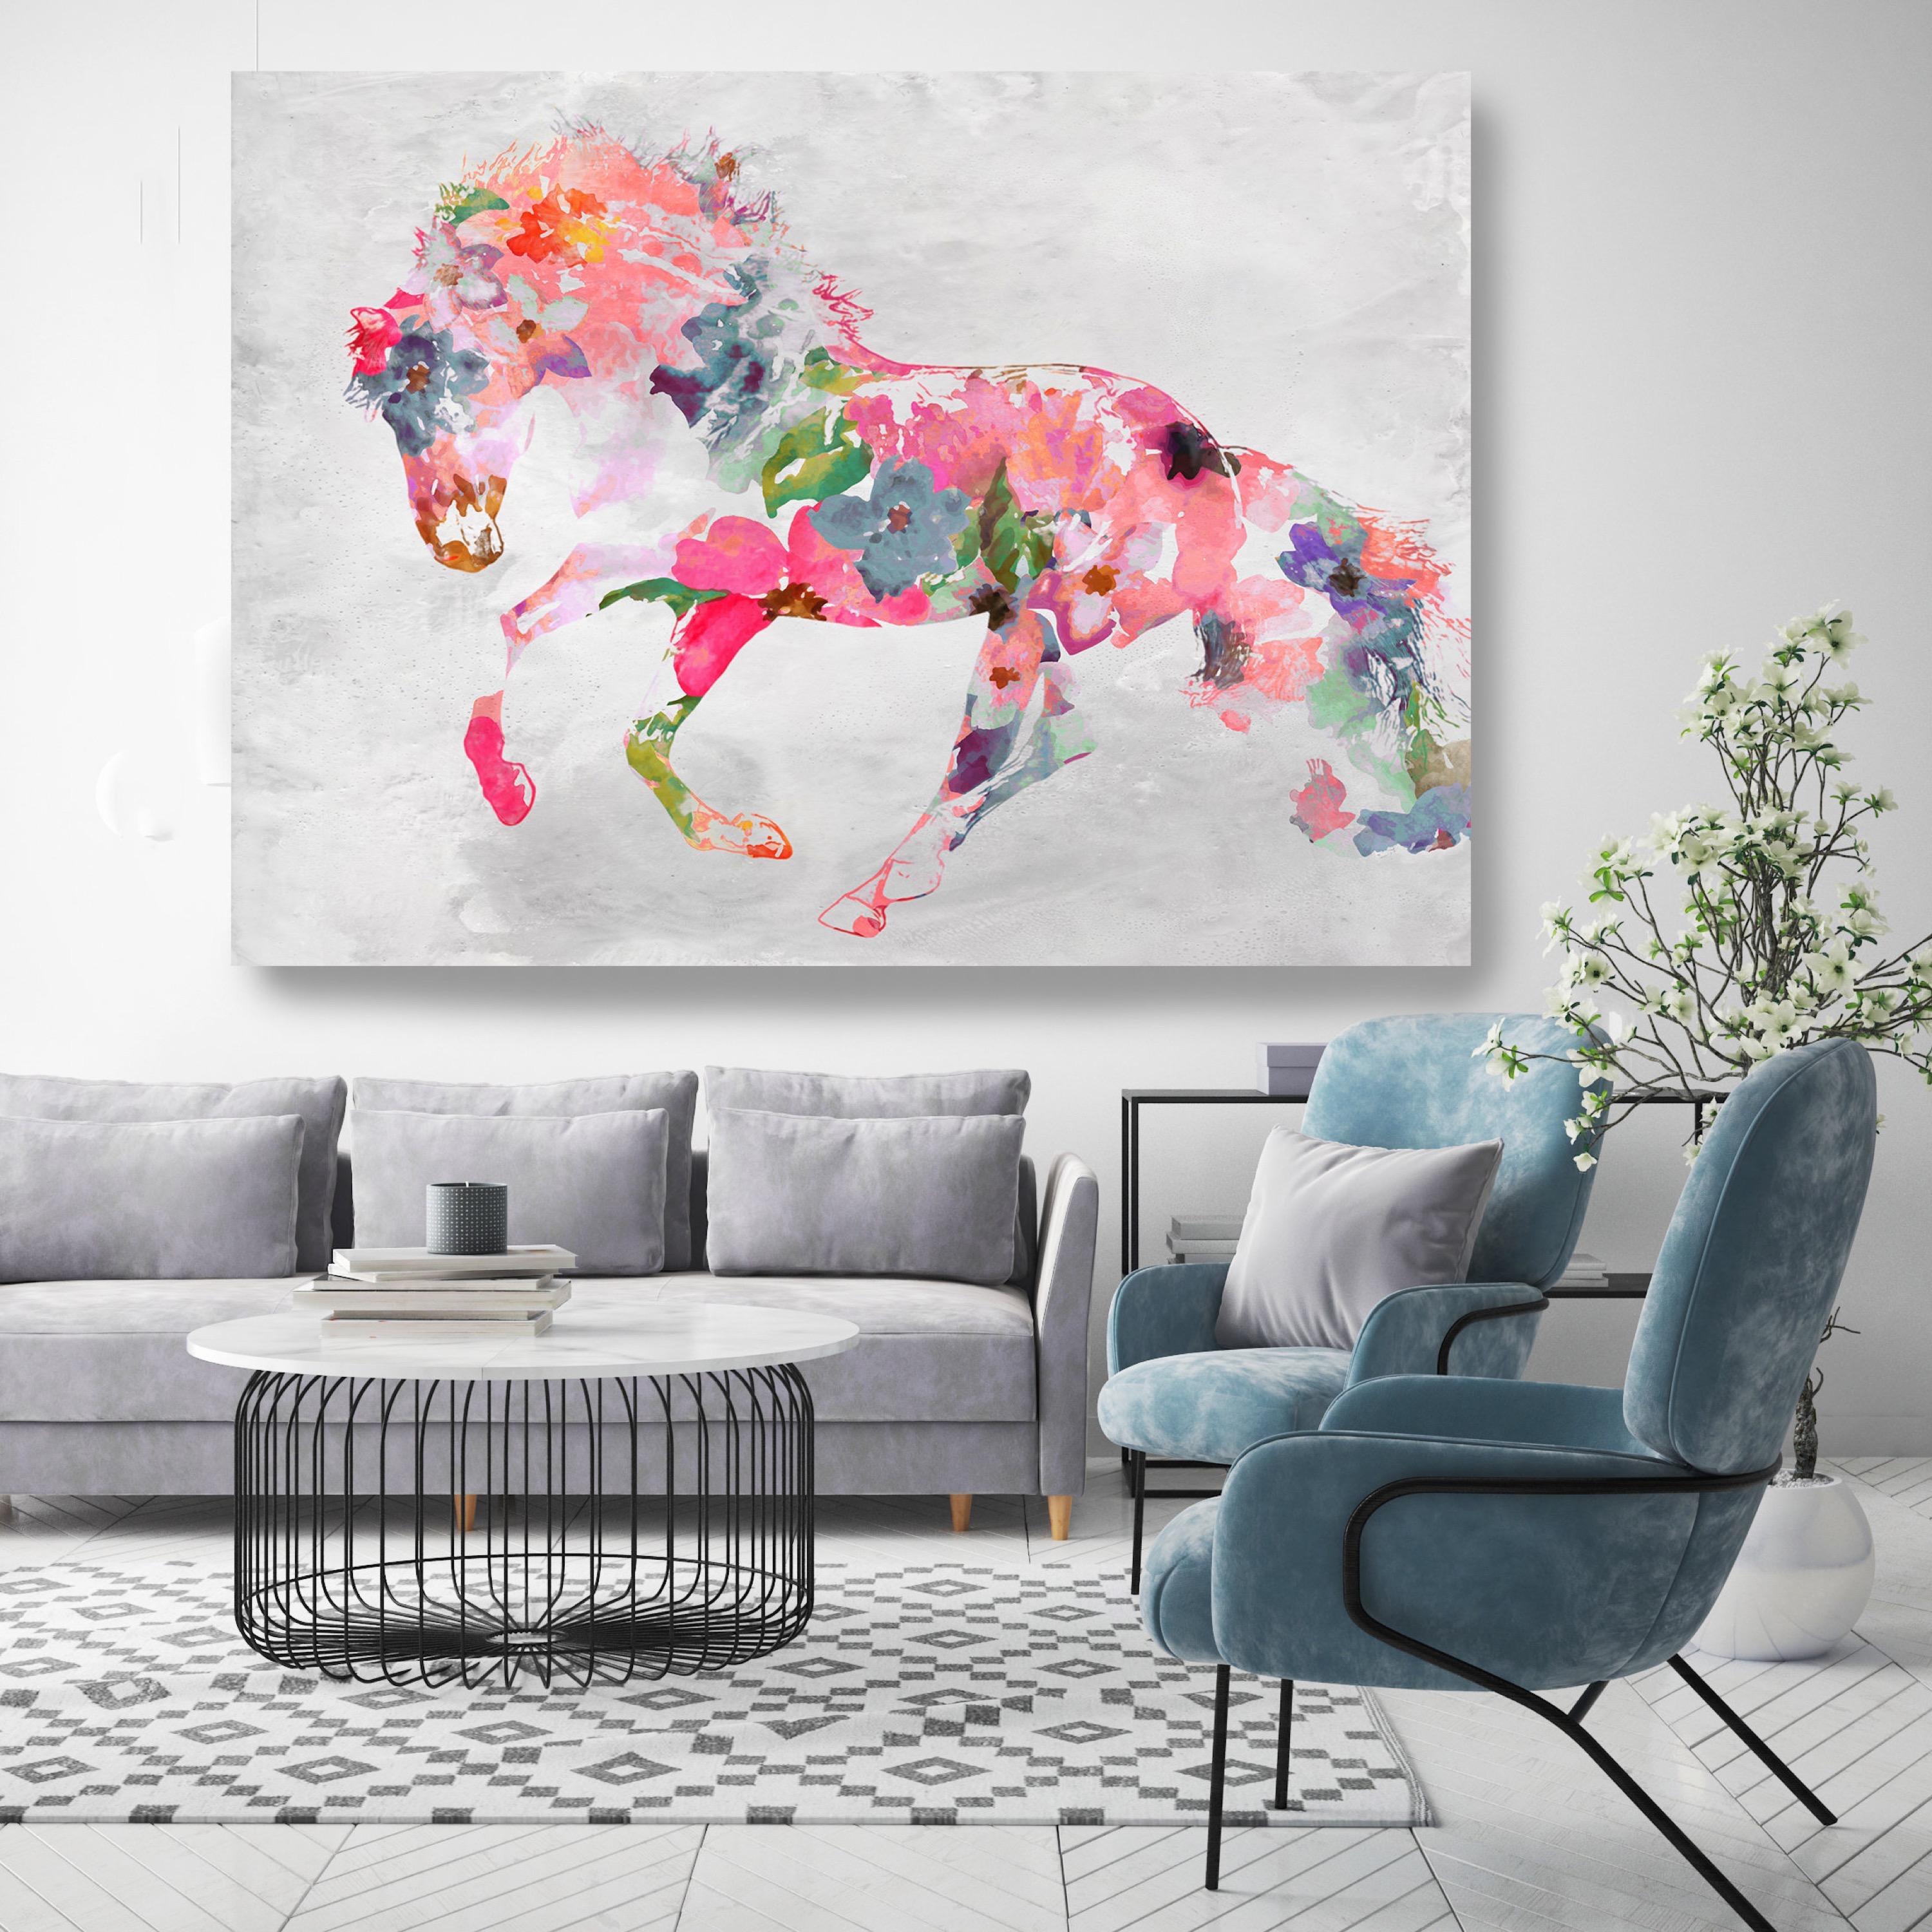 Equestrian Art Beautiful Floral Horse BOHO Painting on Canvas 40x60